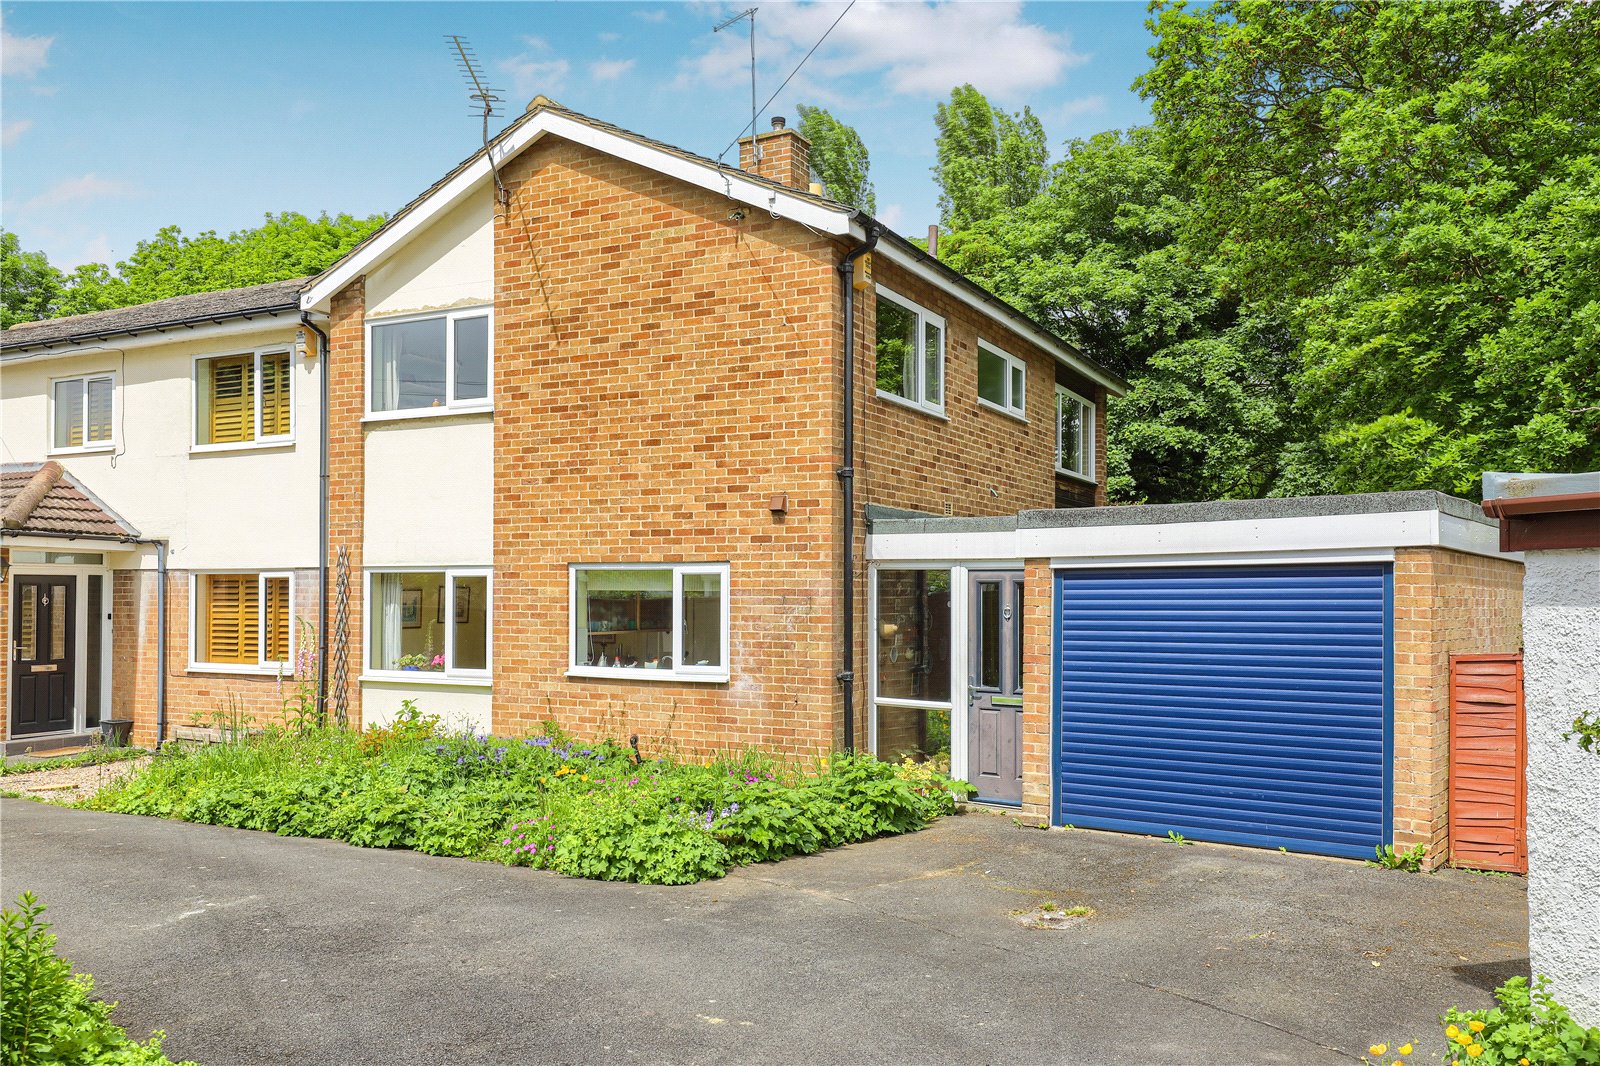 3 bed house for sale in Rookwood Road, Nunthorpe  - Property Image 1